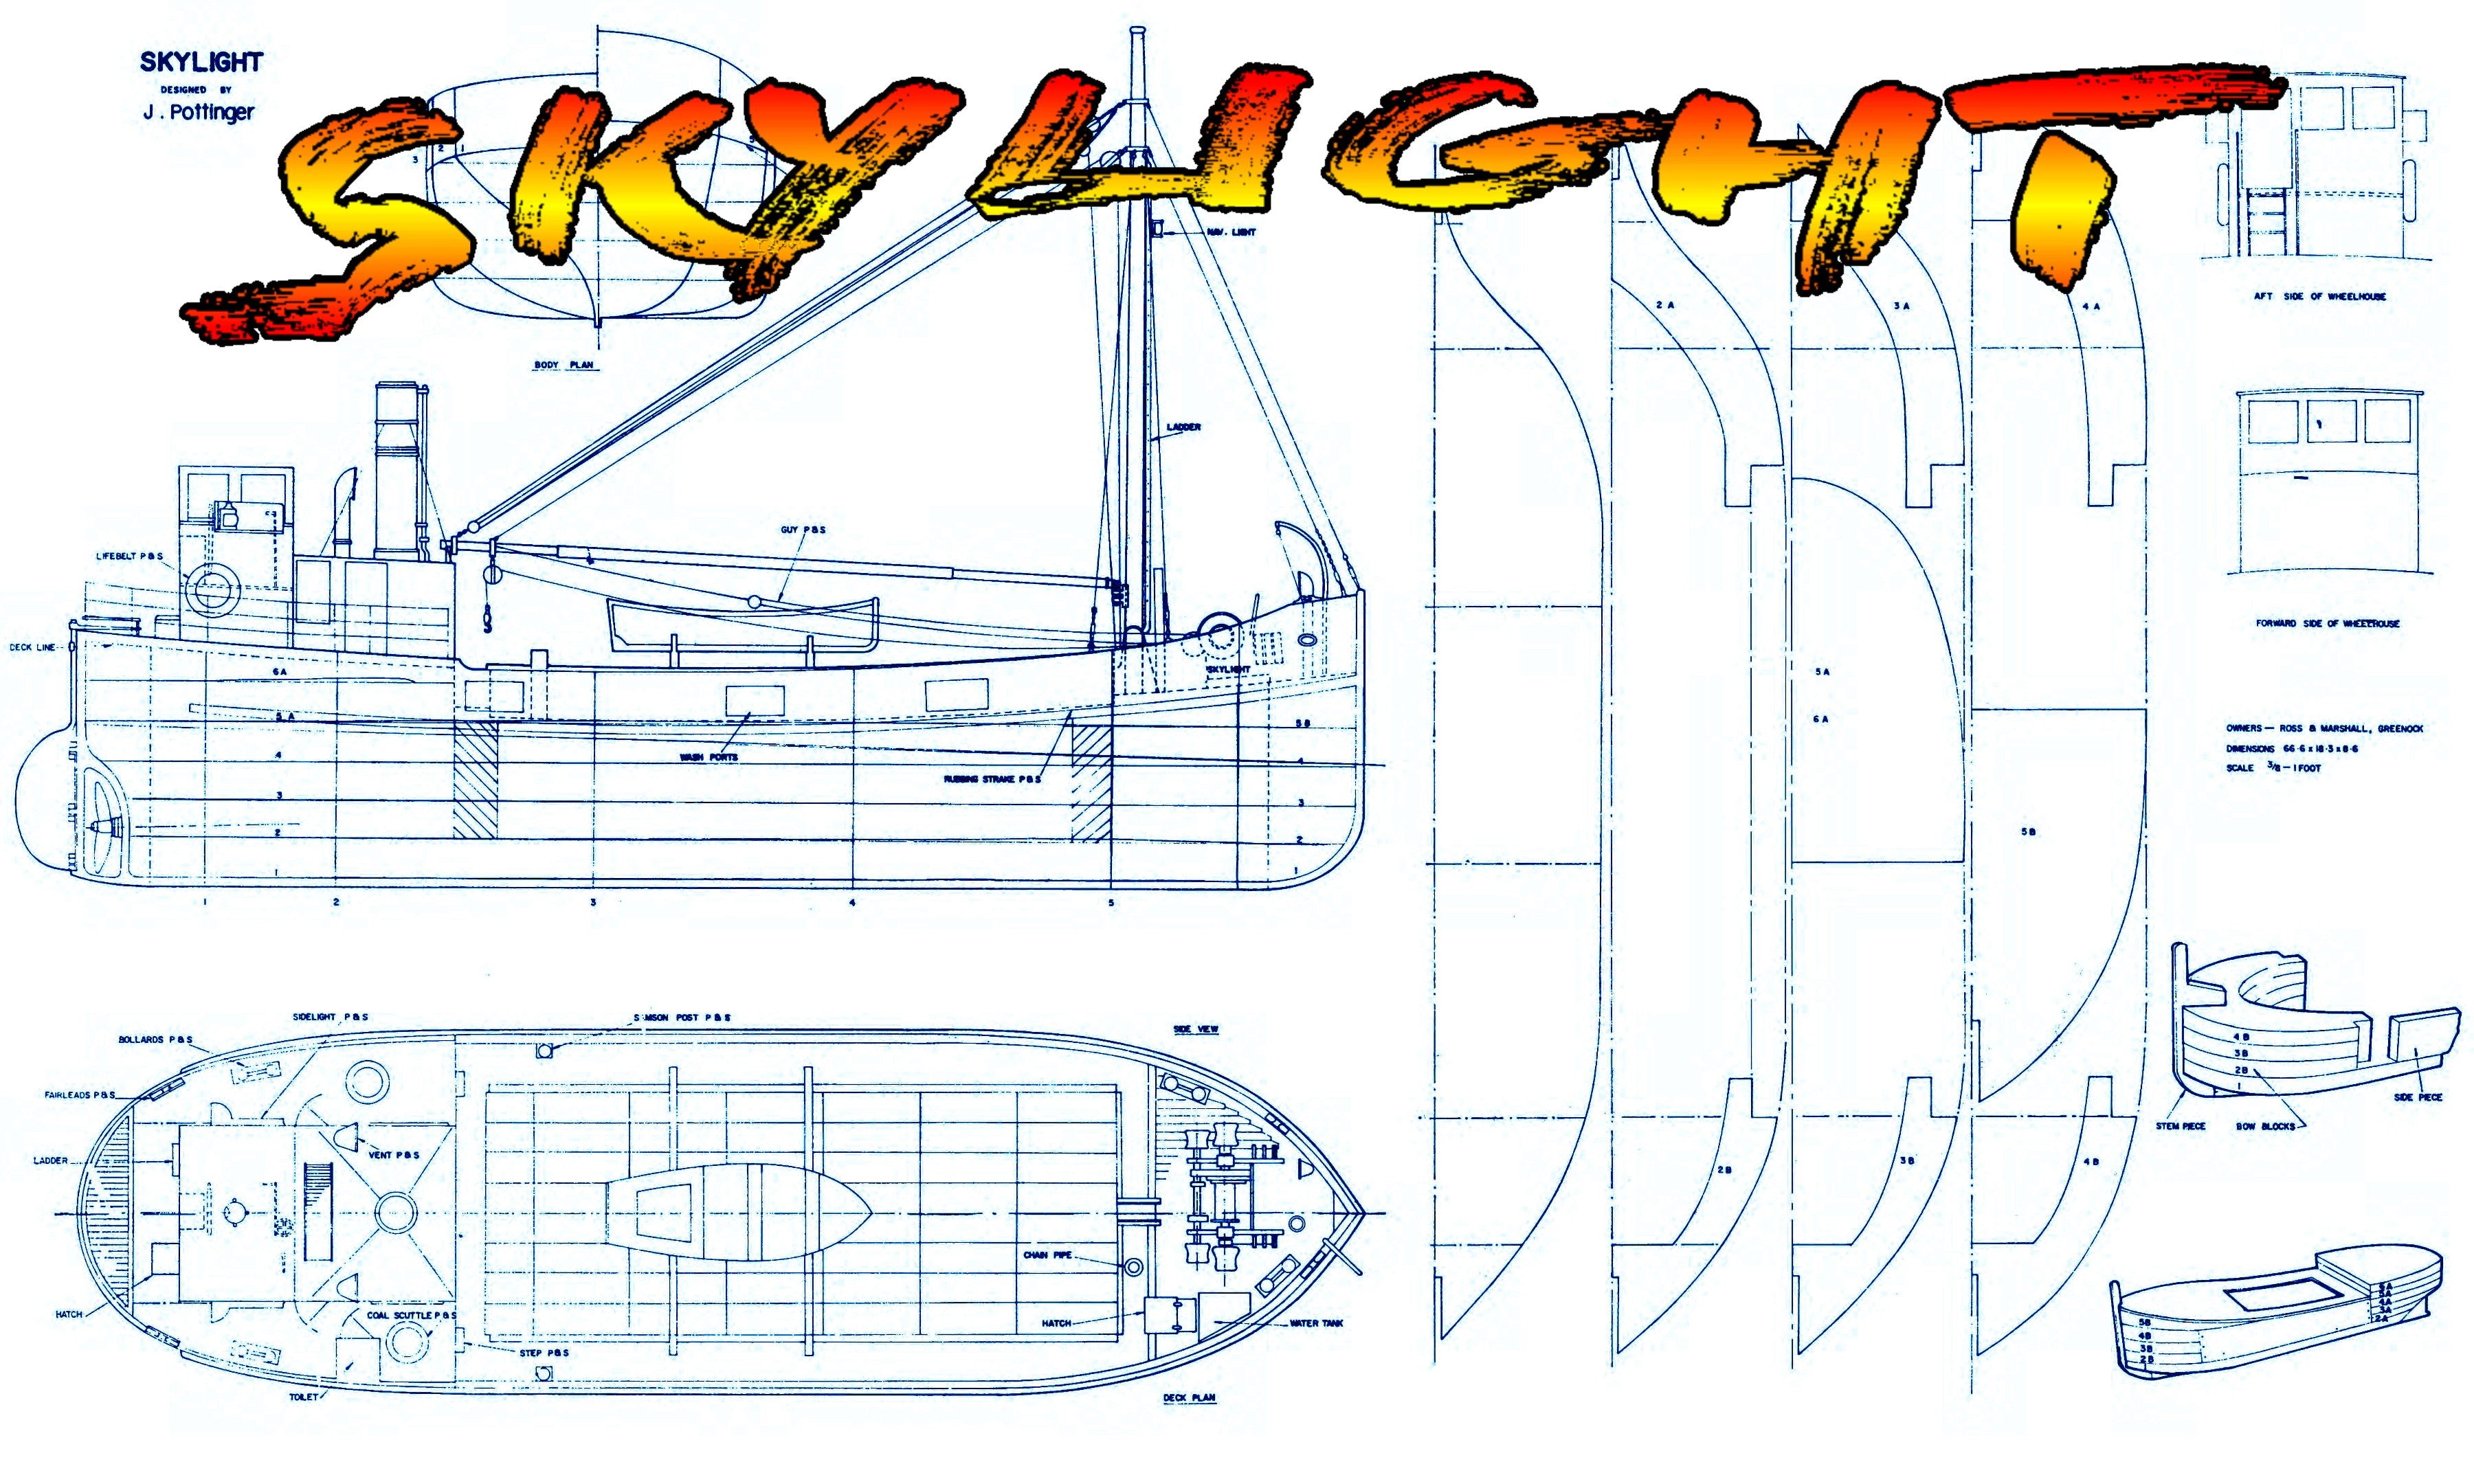 full size printed plan vintage 1968 scale 1:32 clyde puffer  “skylight” suitable for radio control